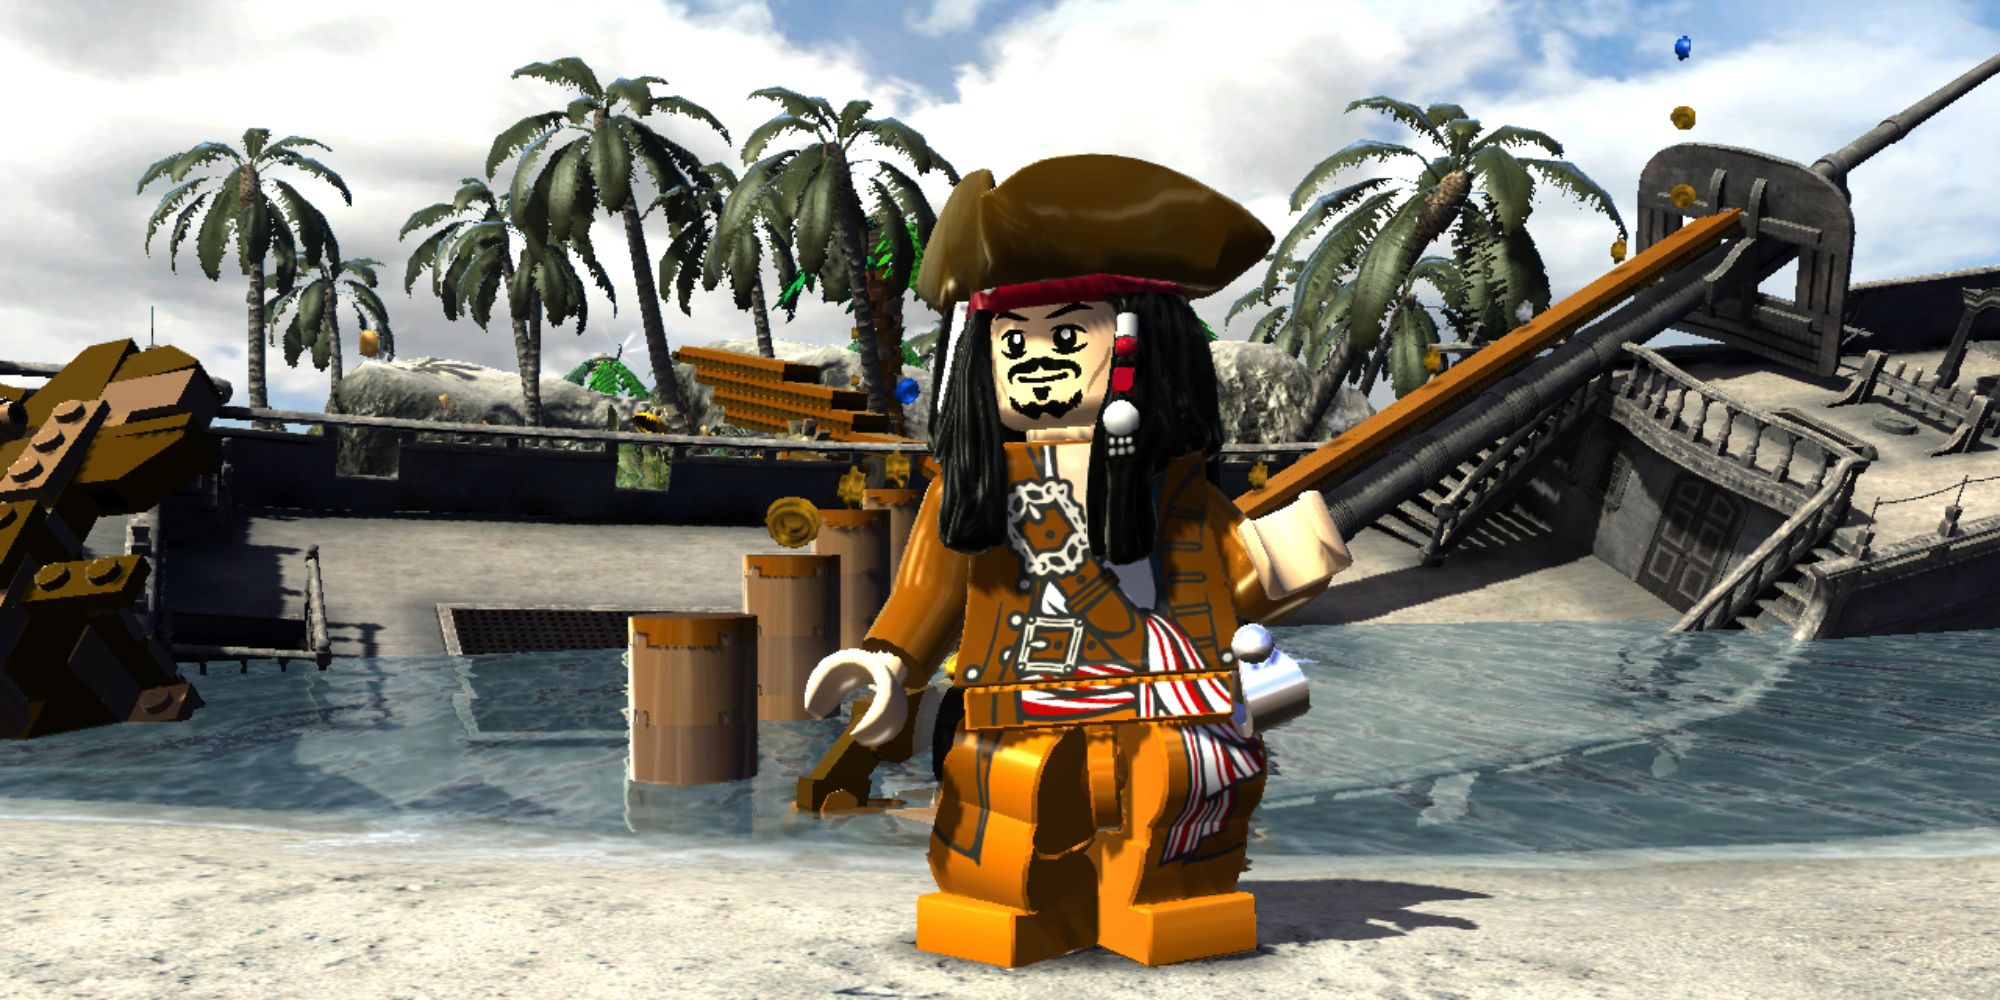 Lego Pirates Of The Caribbean Screenshot Of Jack Sparrow In Front Of Shipwreck